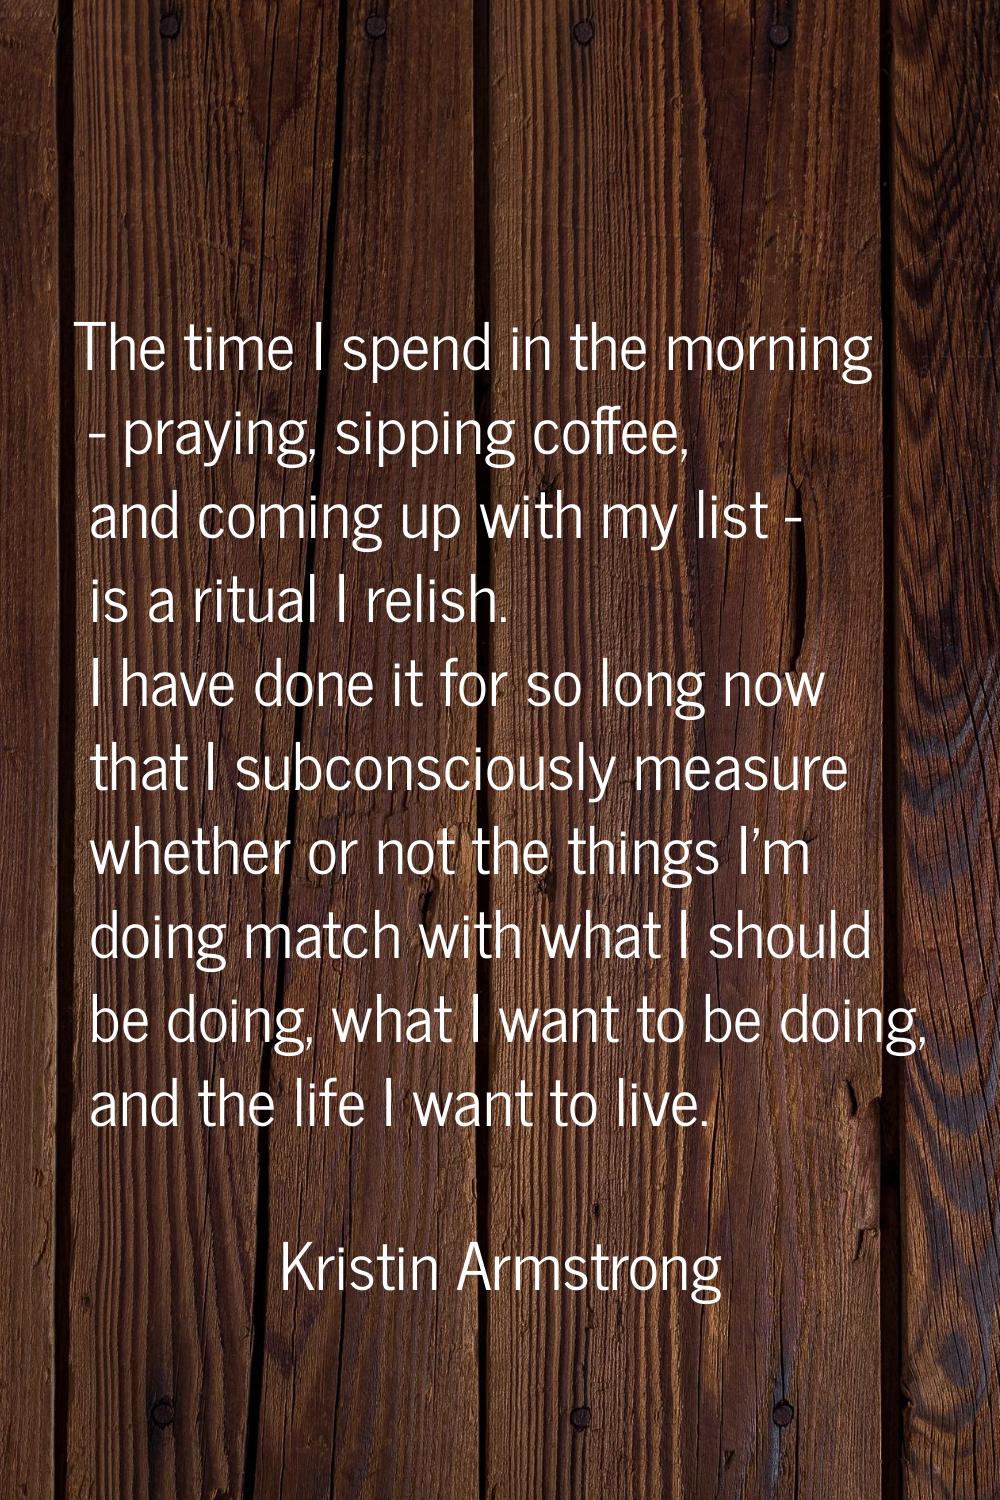 The time I spend in the morning - praying, sipping coffee, and coming up with my list - is a ritual